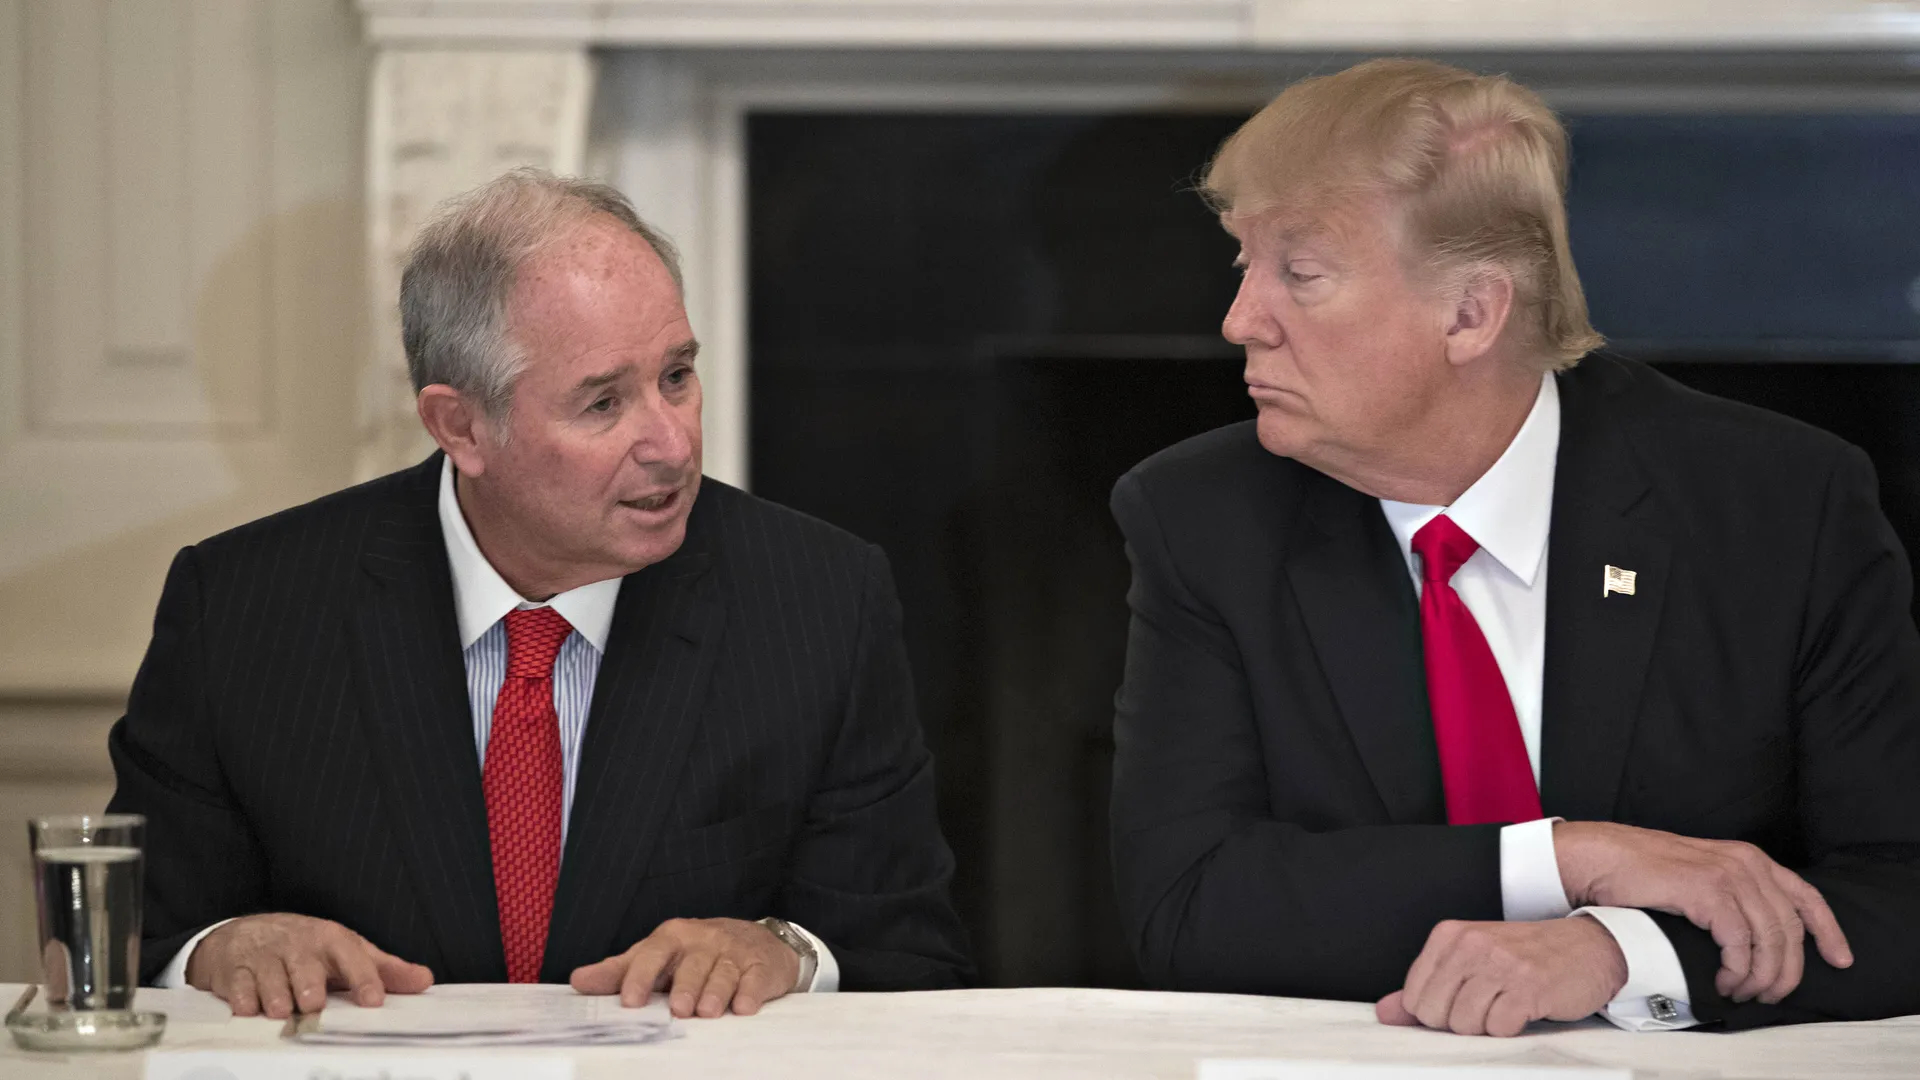 Billionaire co-founder and chief executive of investment group Blackstone, Stephen A. Schwarzman [left], announces his support for Trump. 

Image Source: Axios 